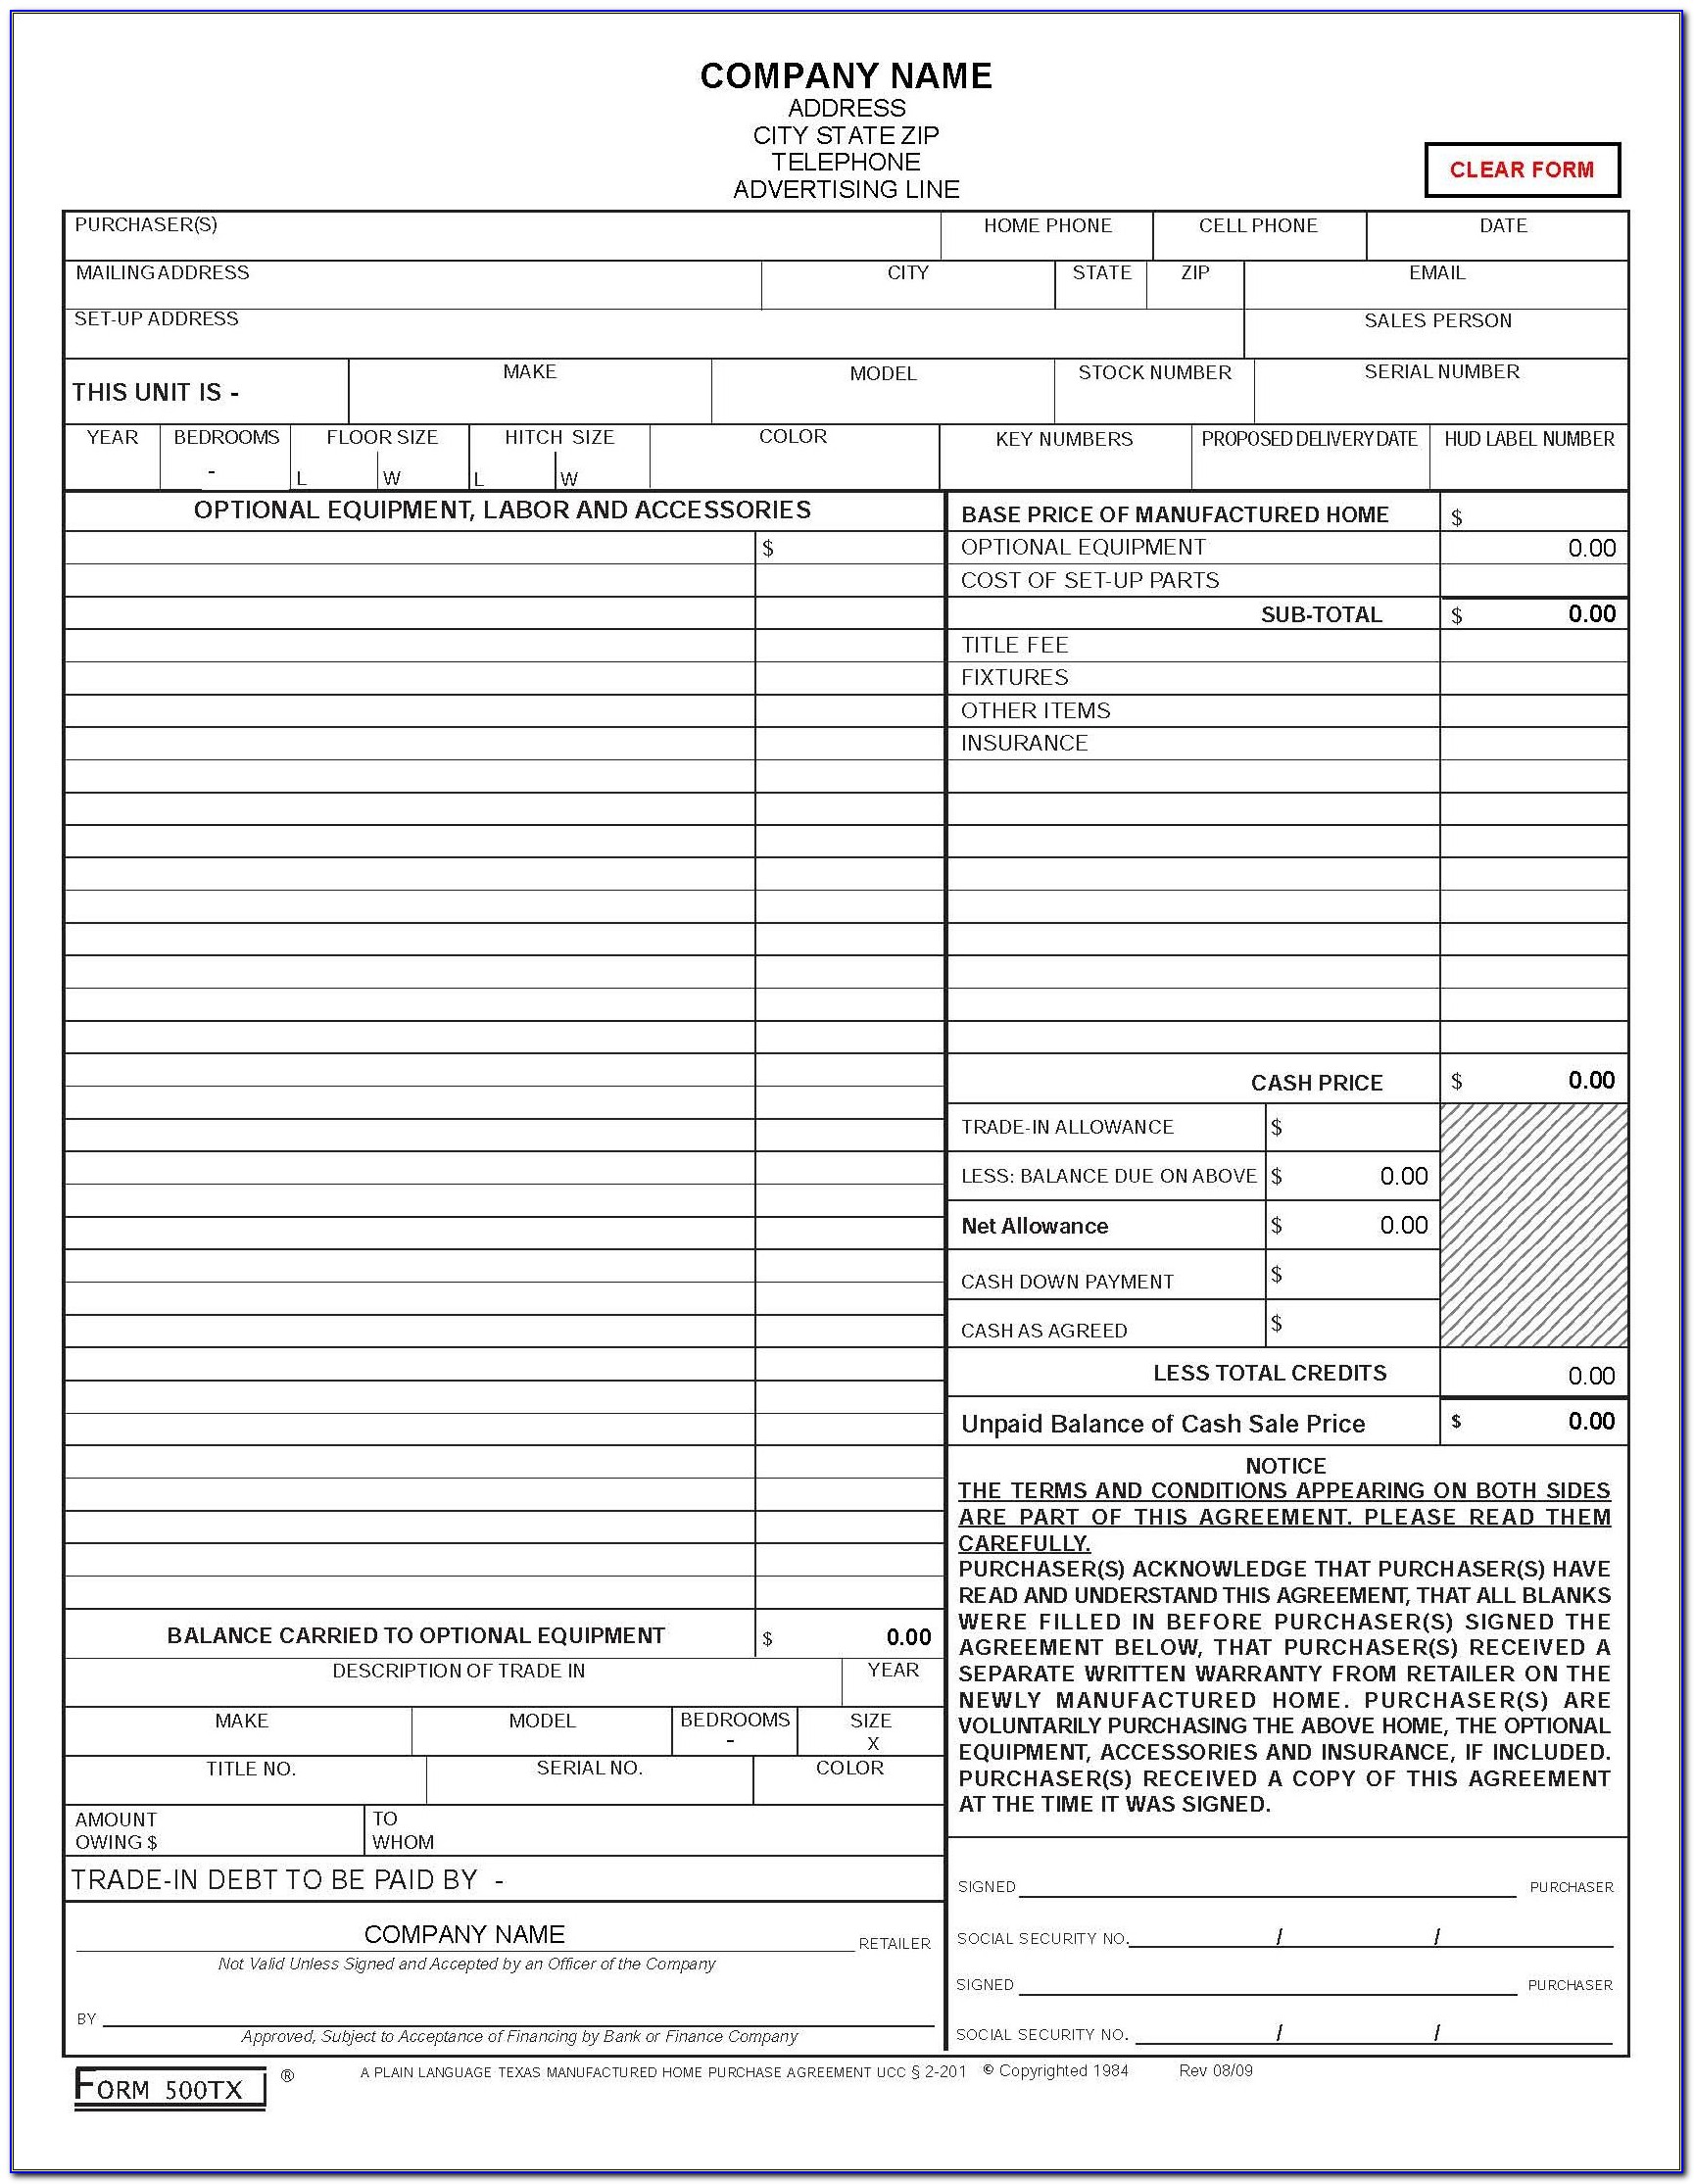 Asset Purchase Agreement Form New York